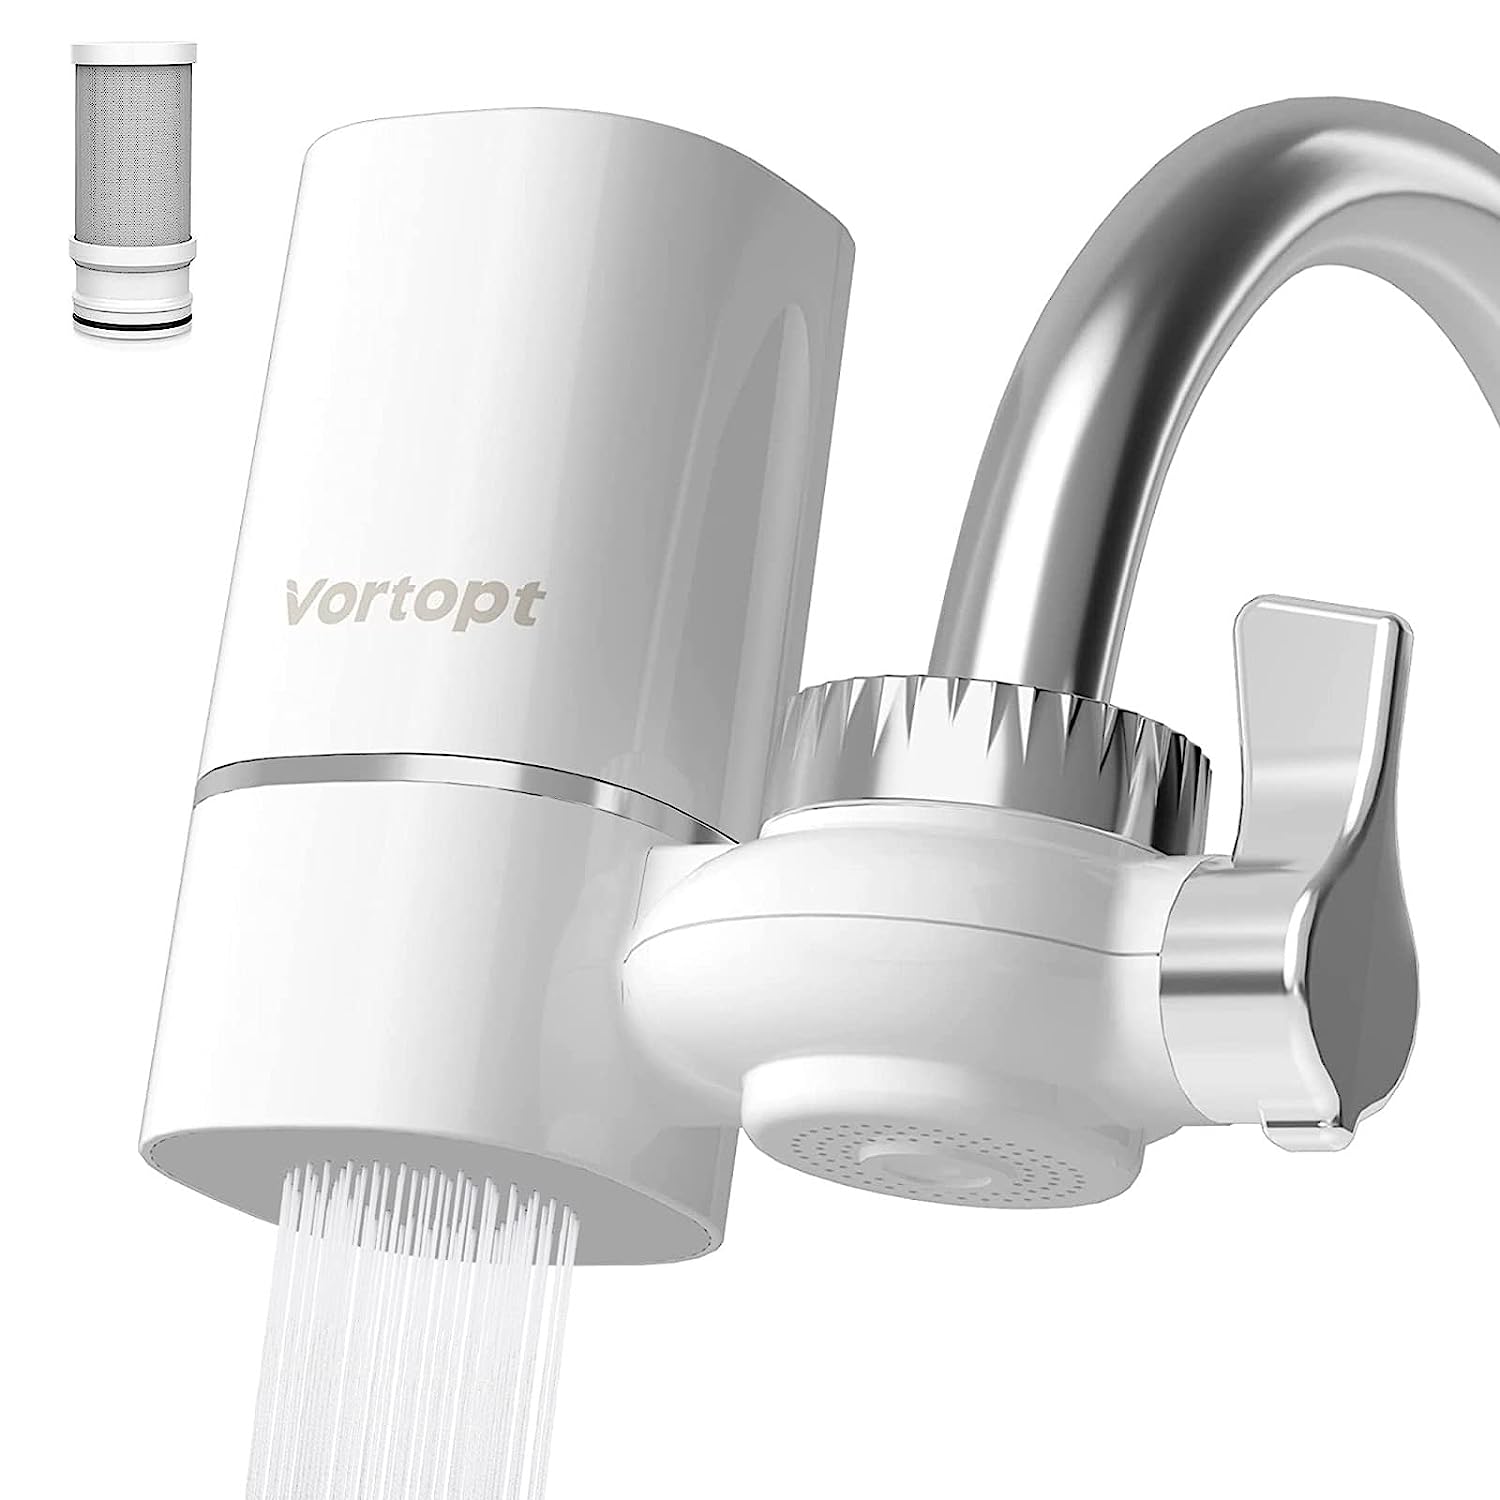 Vortopt Faucet Water Filter for Sink - 400G Water Purifier for Faucet, Mount Tap Water Filtration System for Kitchen, Bathroom, Reduces Lead, Chlorine, Bad Taste, T1 Fits Standard Faucets, 1 Filter